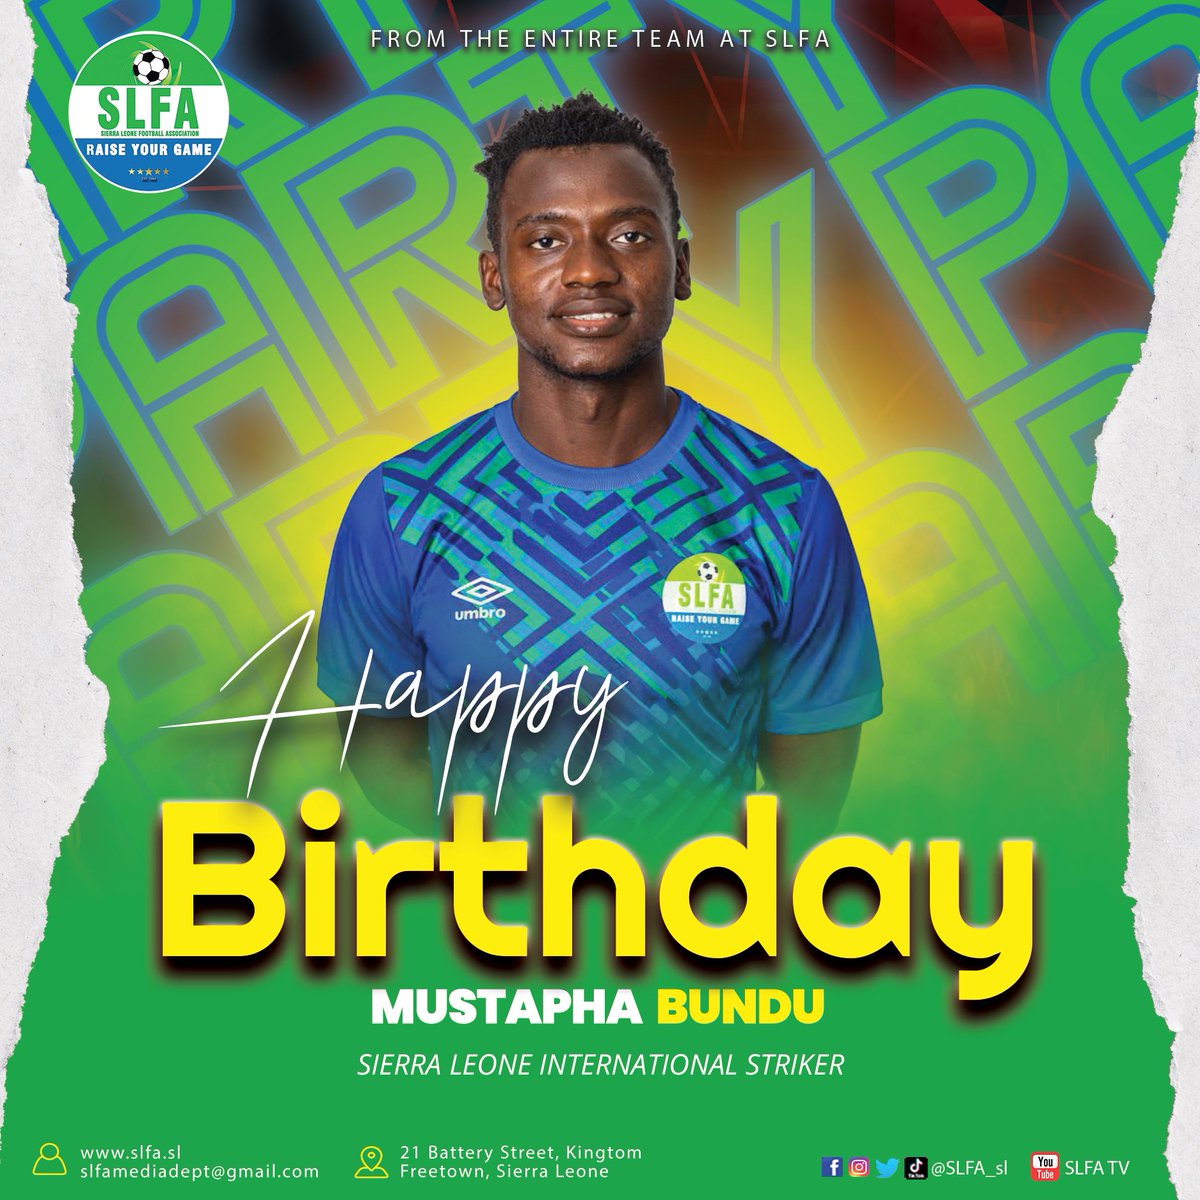 Happy birthday to a remarkable national team player Mustapha Bundu! May your special day be filled with joy, success, and memorable moments both on and off the field. Here's to another year of incredible achievements and representing your country with pride!